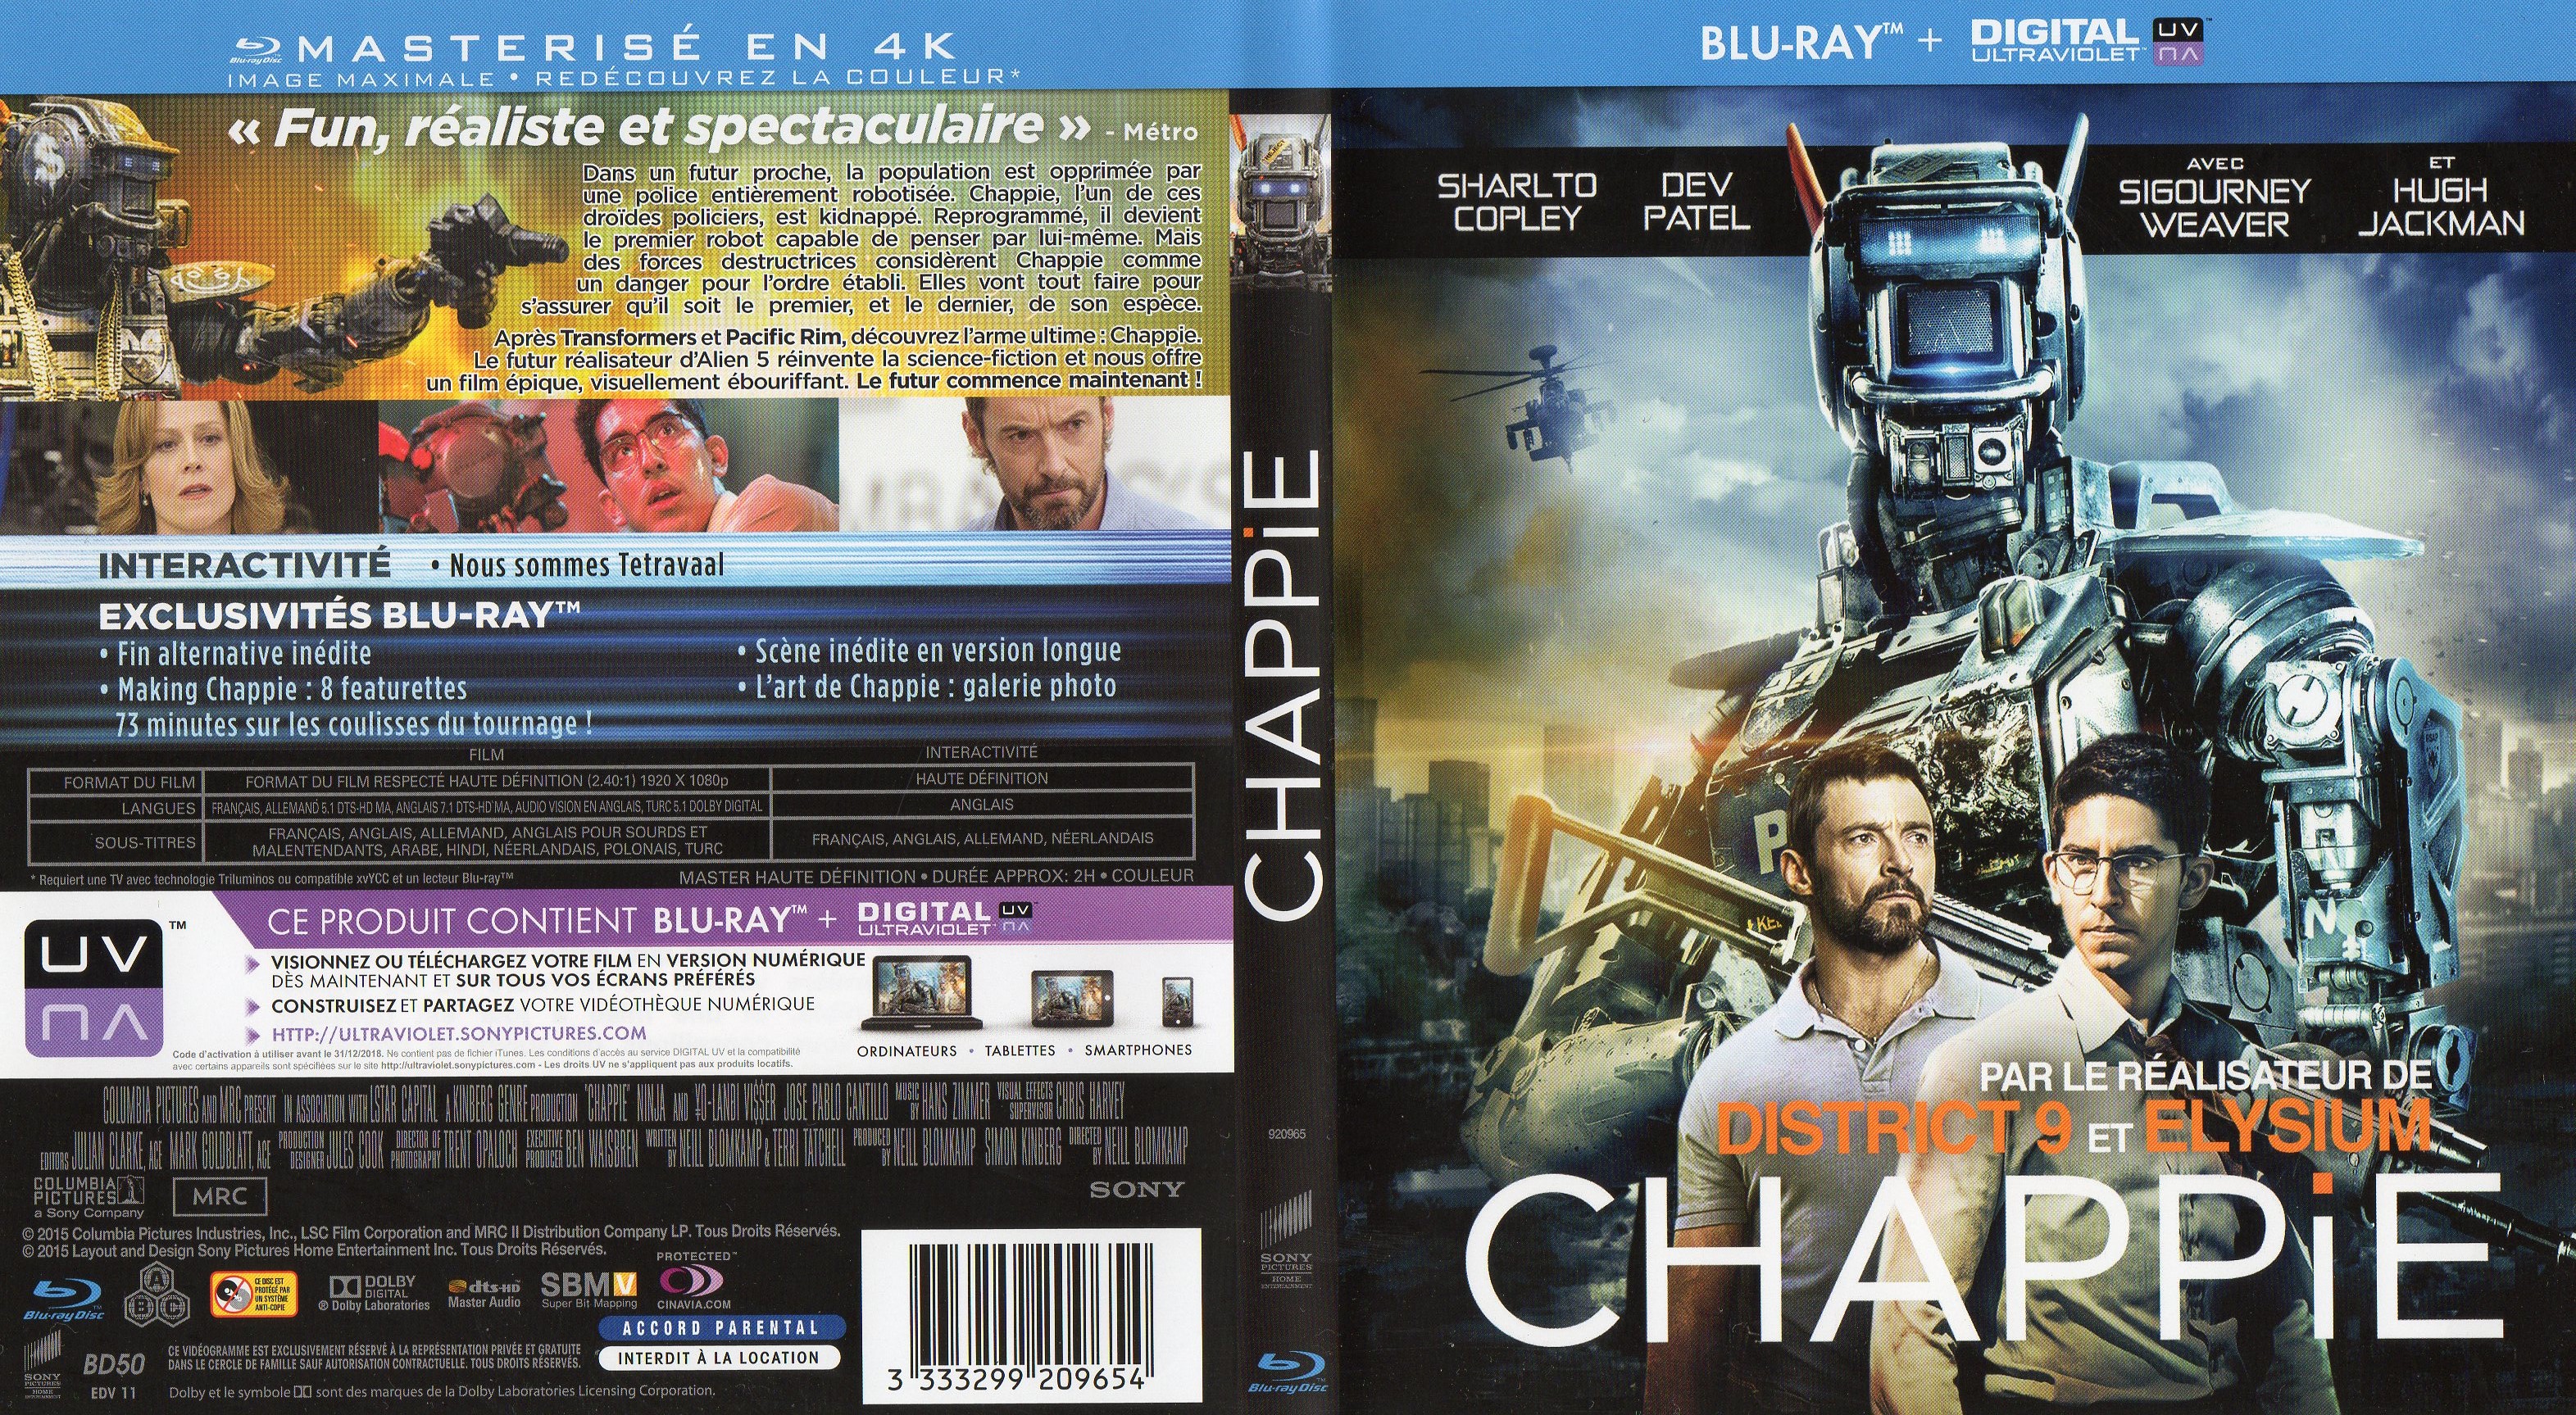 Jaquette DVD Chappie (BLU-RAY)